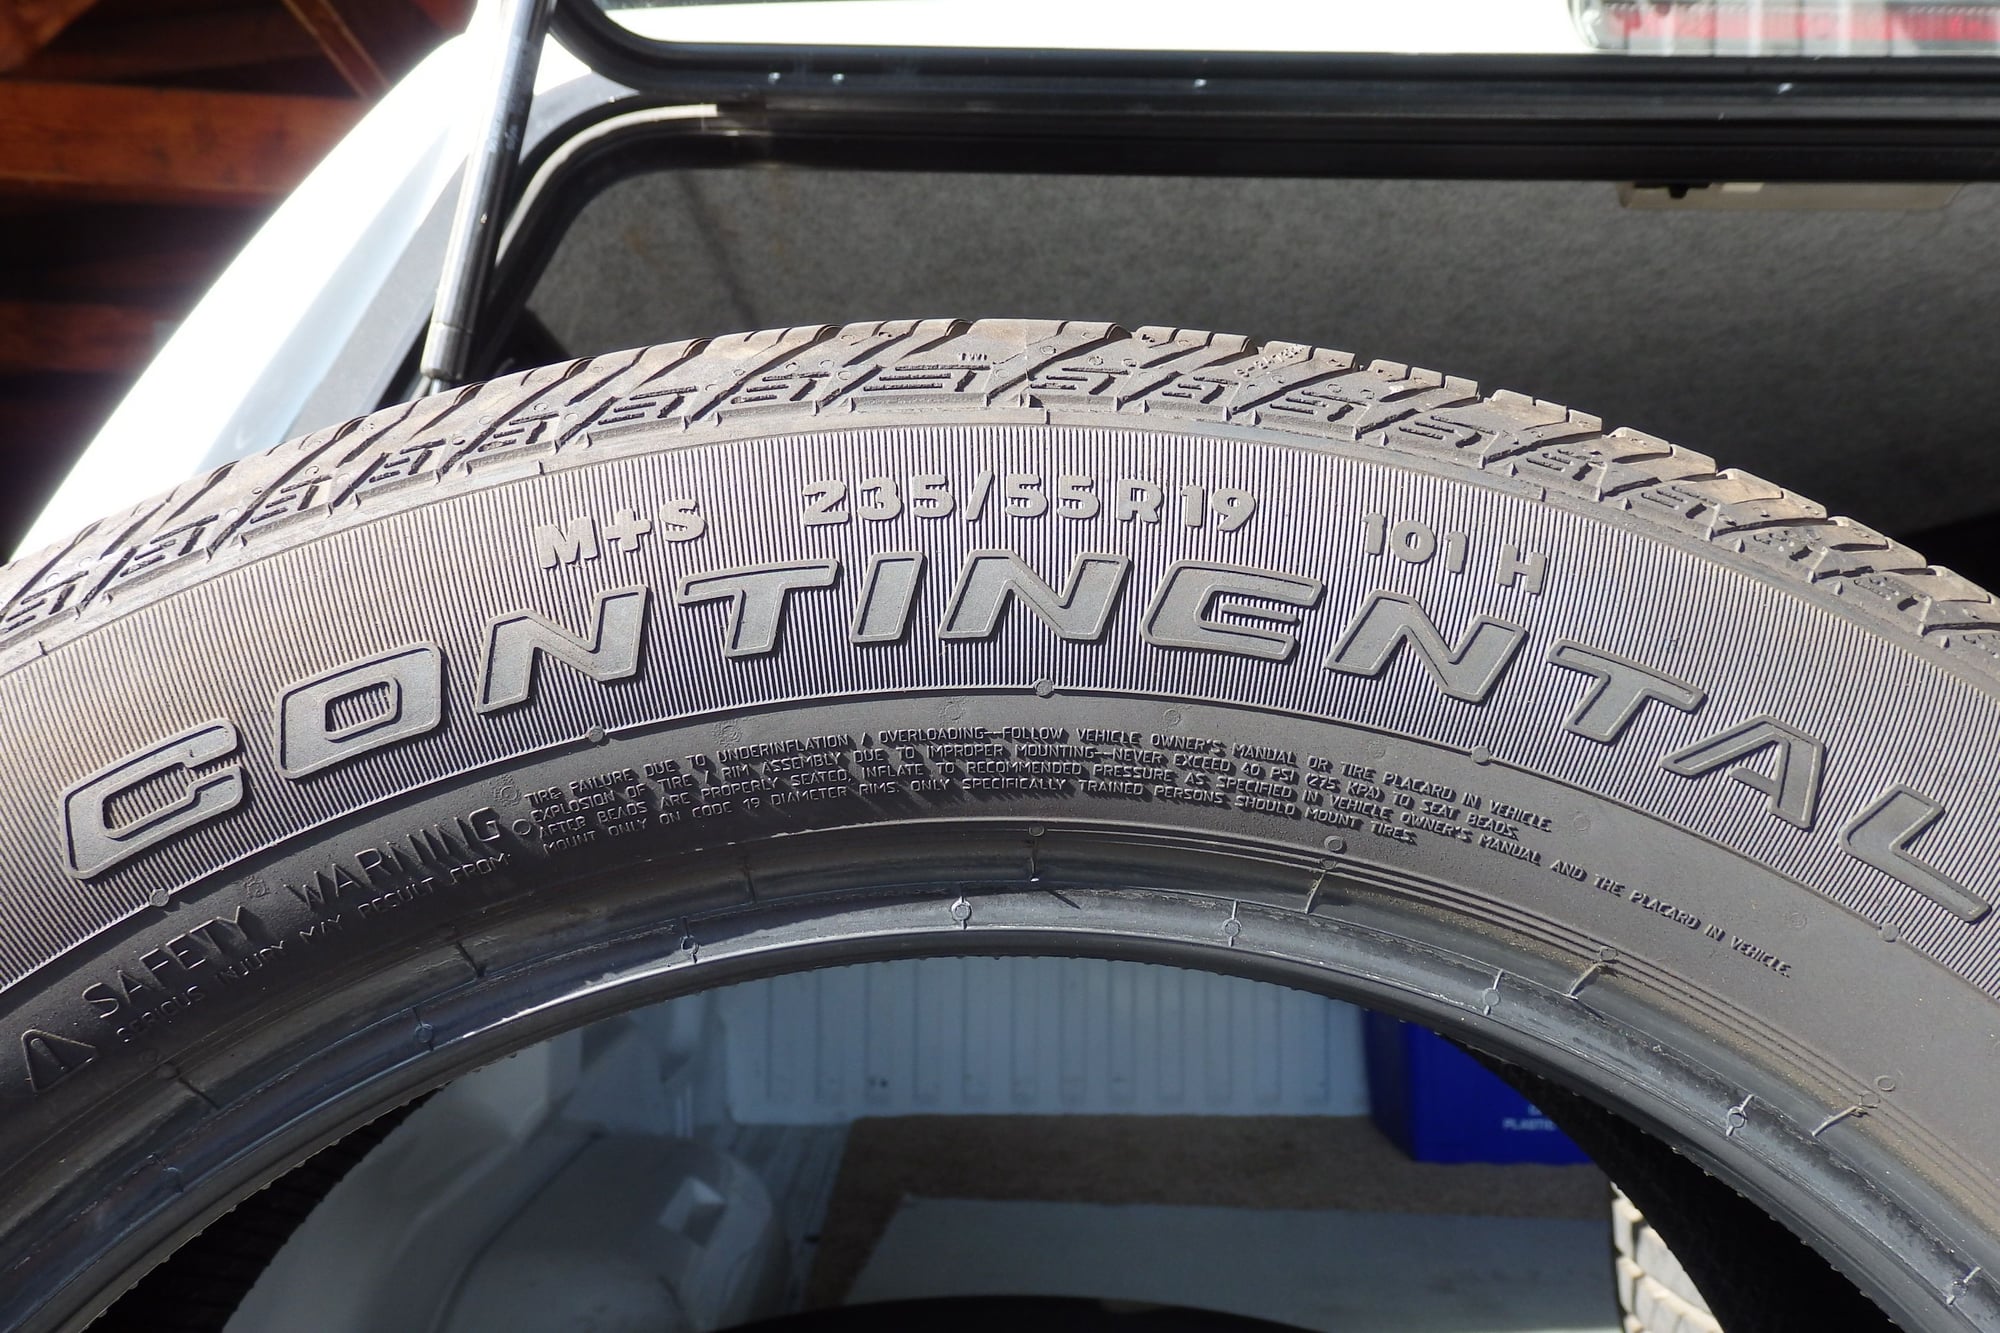 Wheels and Tires/Axles - FS: RDX Advance tires - Used - 2019 to 2020 Acura RDX - San Jose, CA 95032, United States